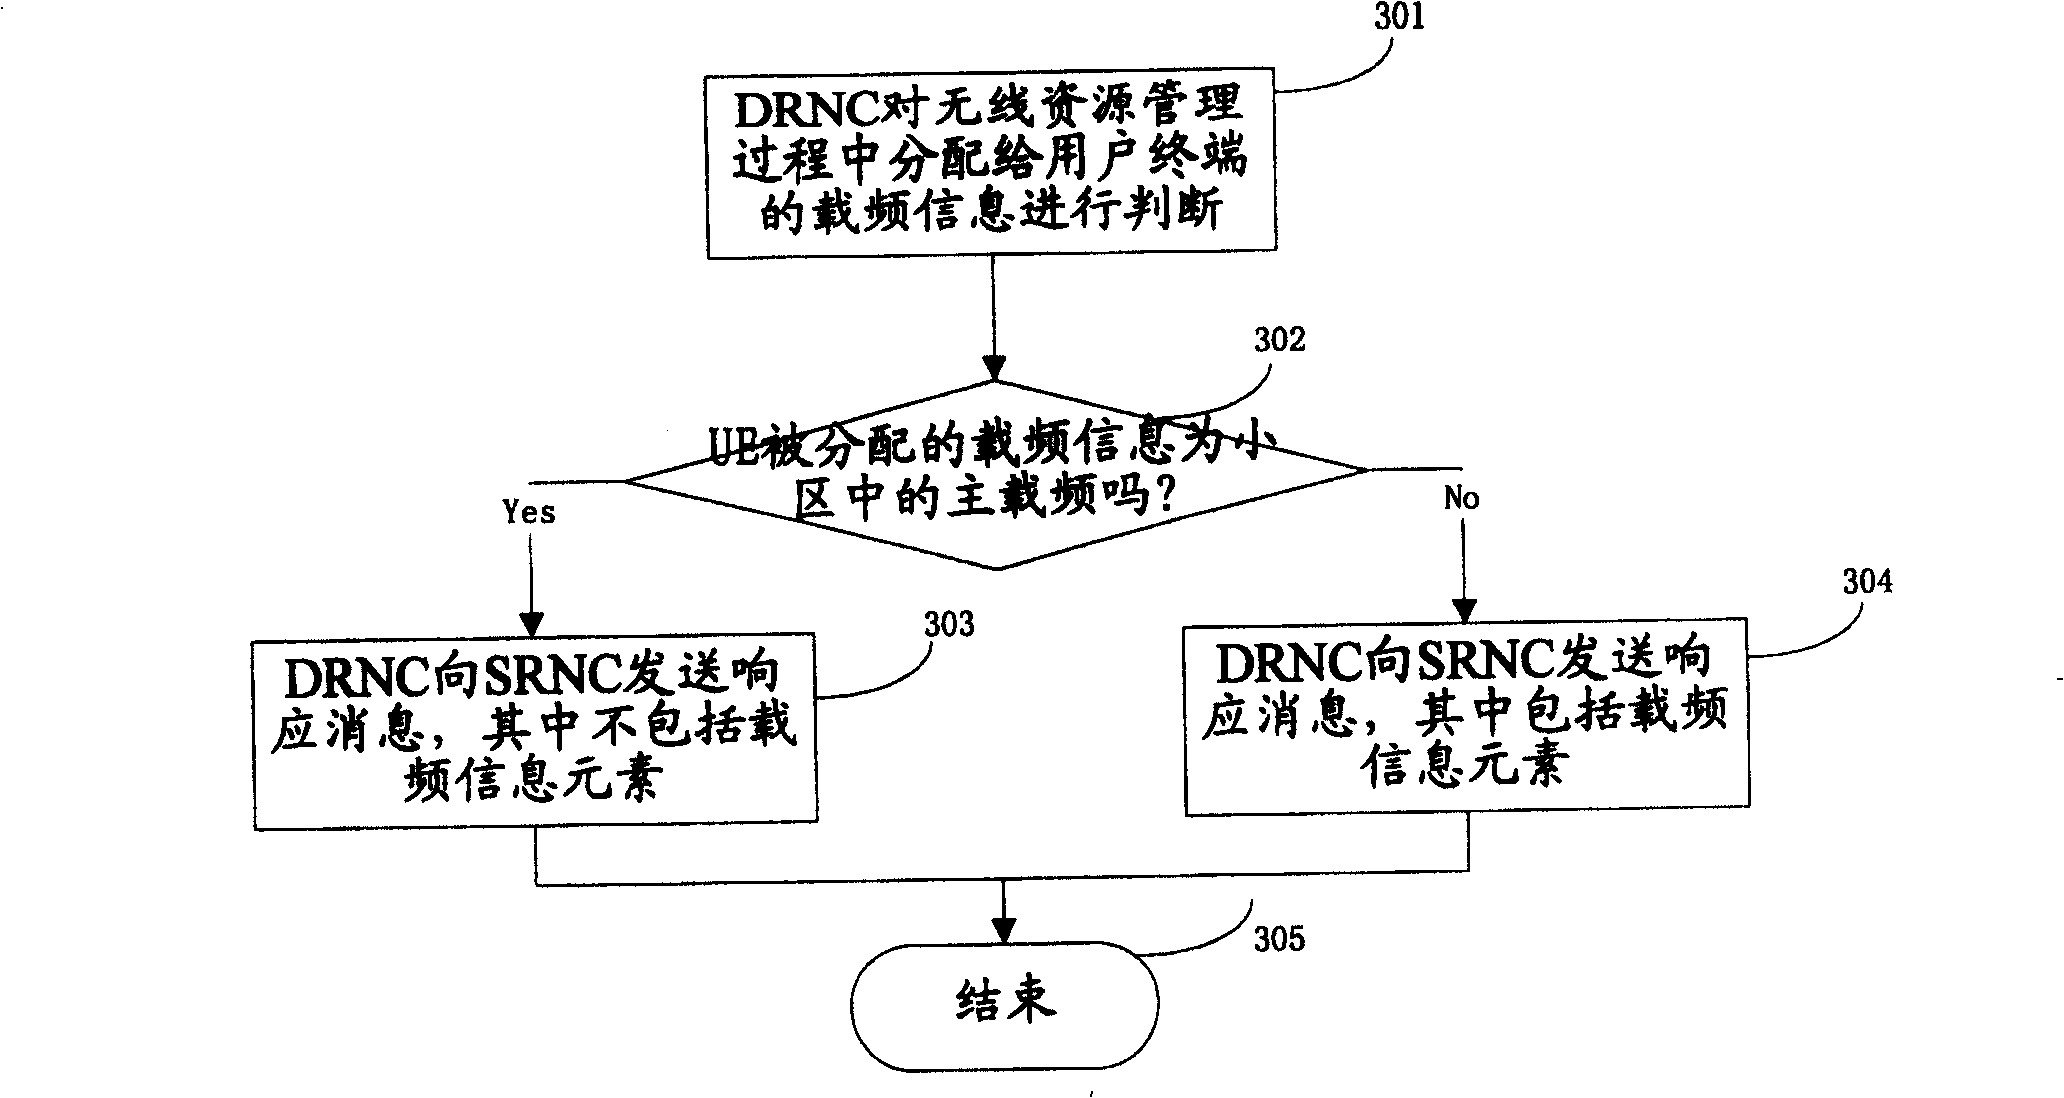 Terminal carrier frequency information interactive method between radio network controller of multiple carrier frequency system